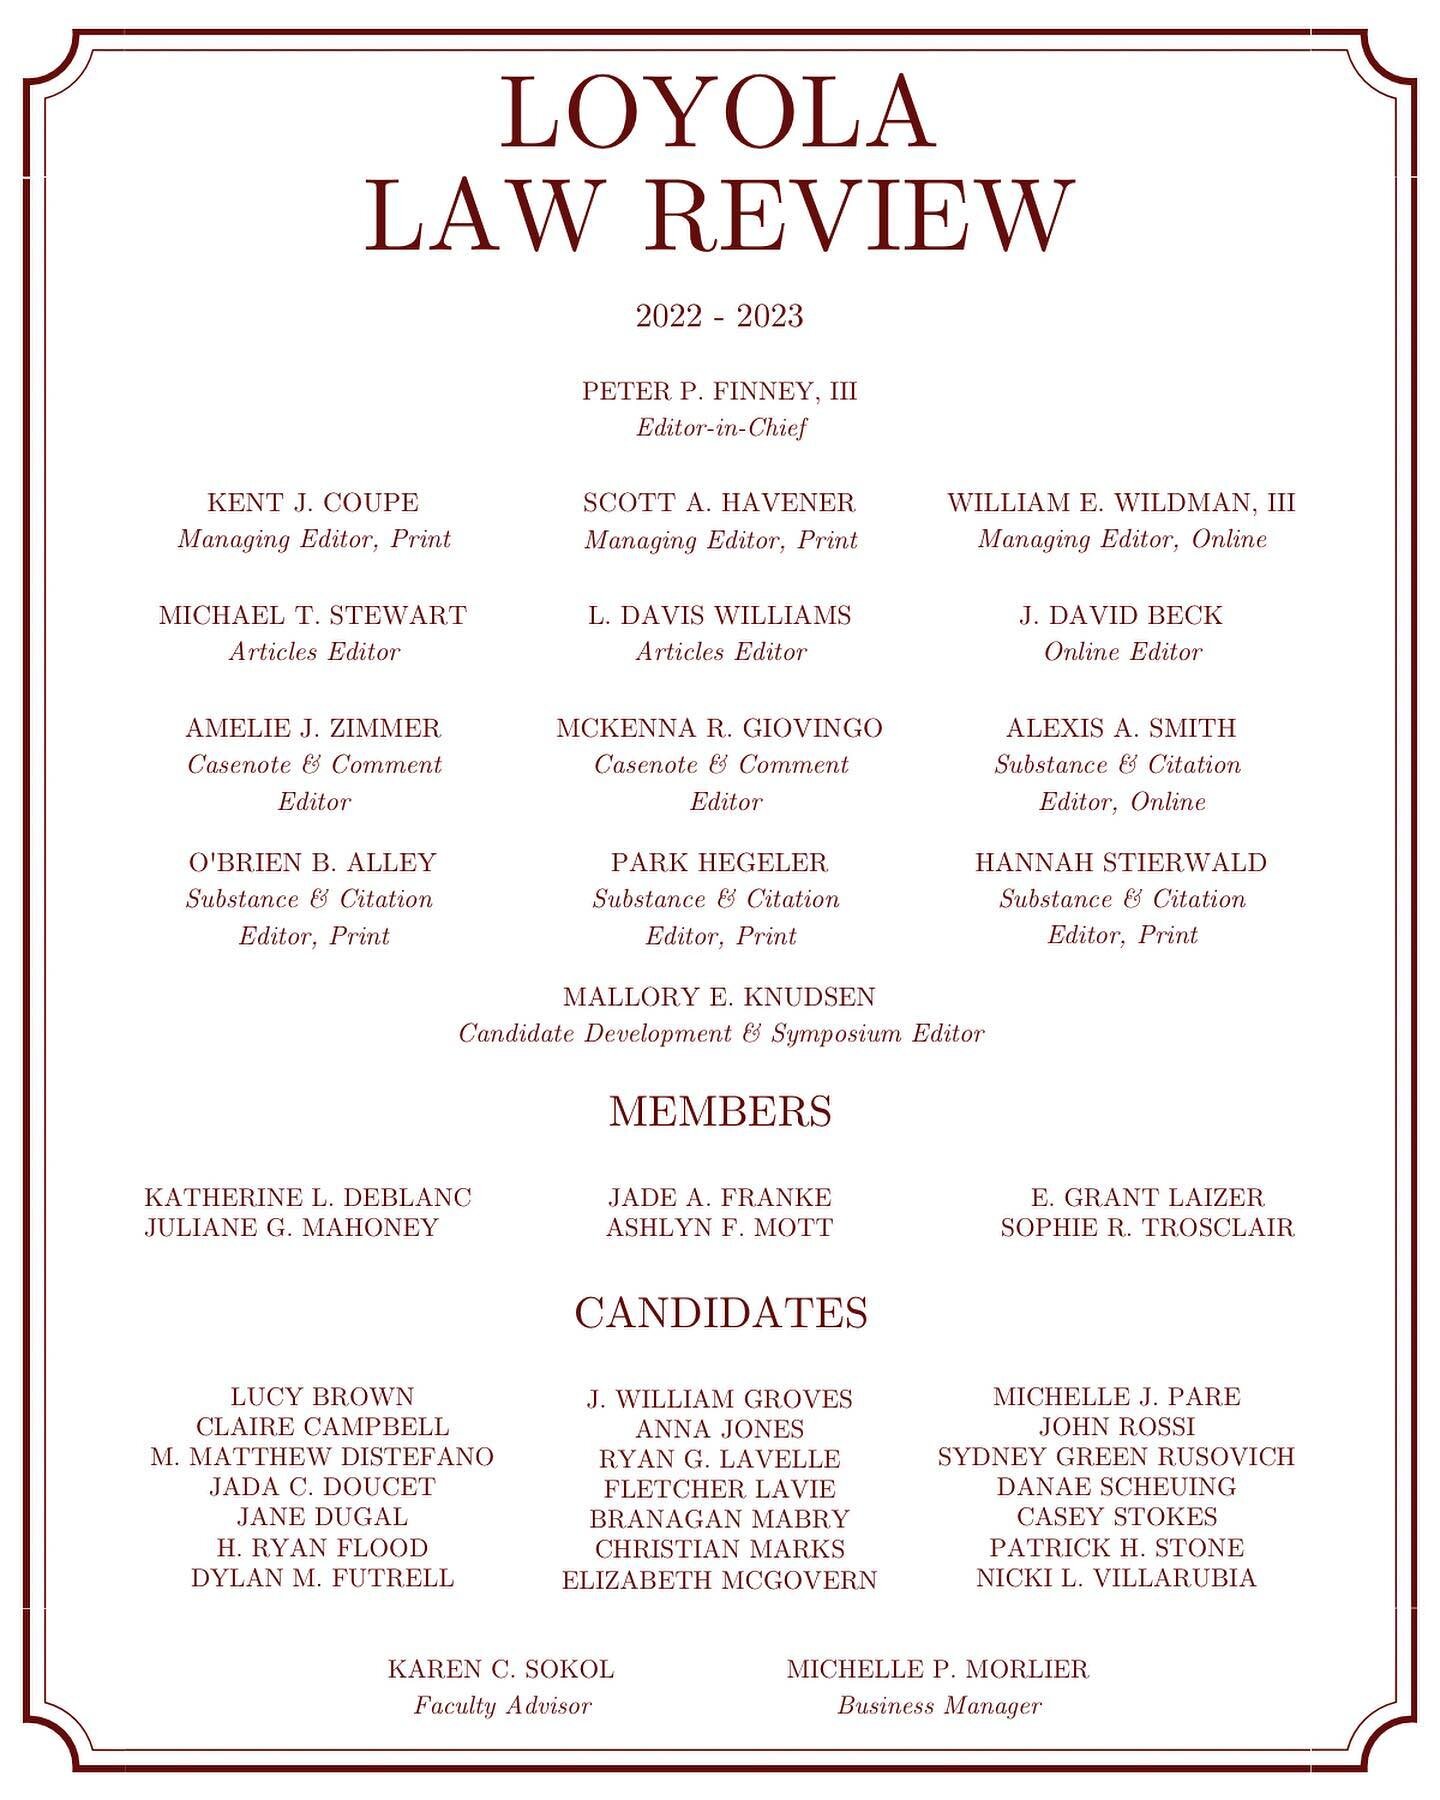 The Loyola Law Review is excited to welcome 21 new candidates to the journal! Congratulations to you all! We look forward to the collaboration to come in the year ahead.